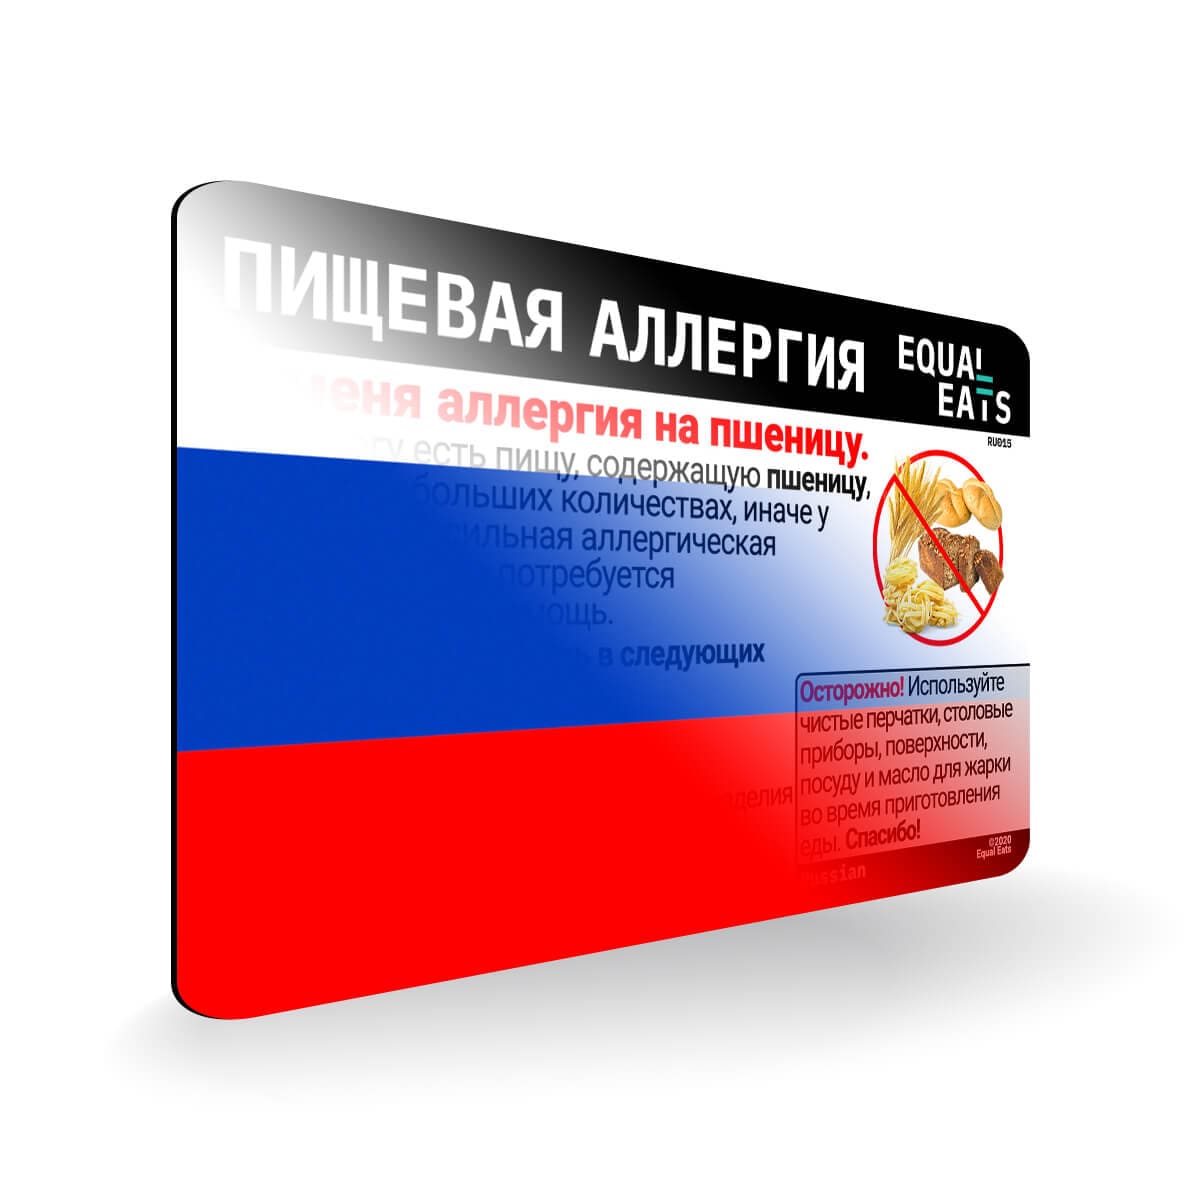 Wheat Allergy in Russian. Wheat Allergy Card for Russia